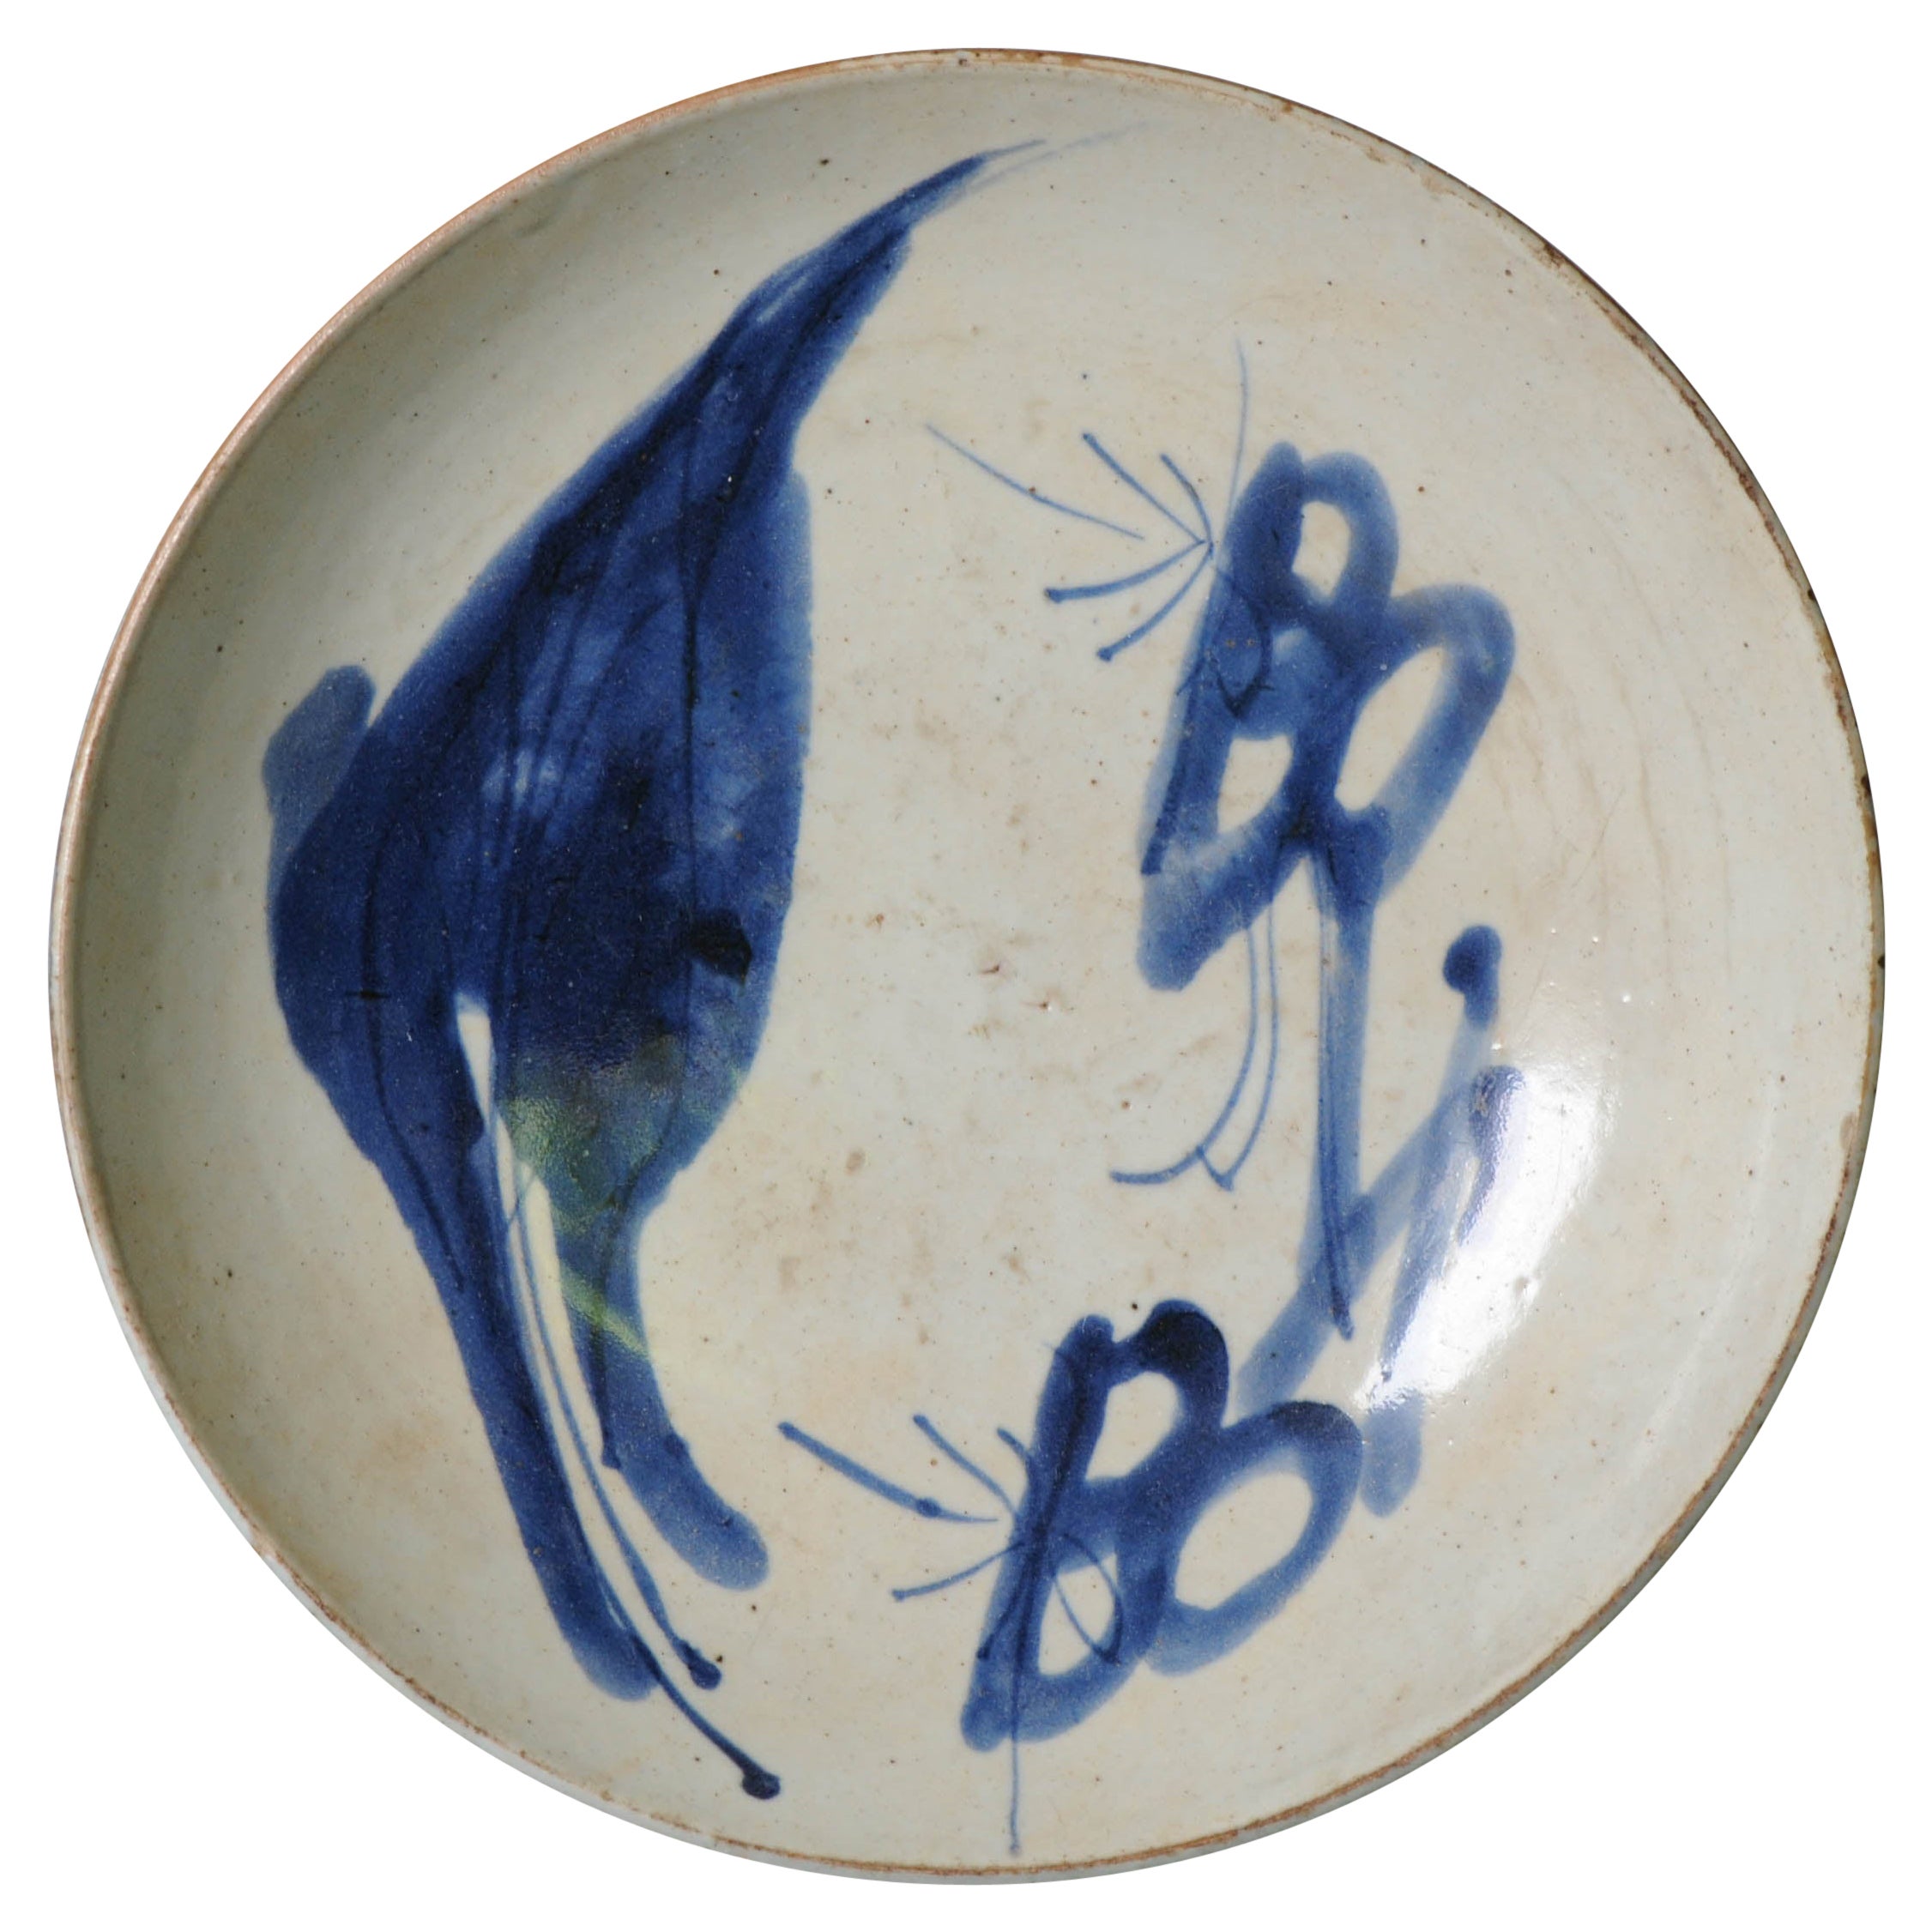 Antiquité chinoise Ming Ming Dynasty Dish China Porcelain Blue White Leaf, 17thC